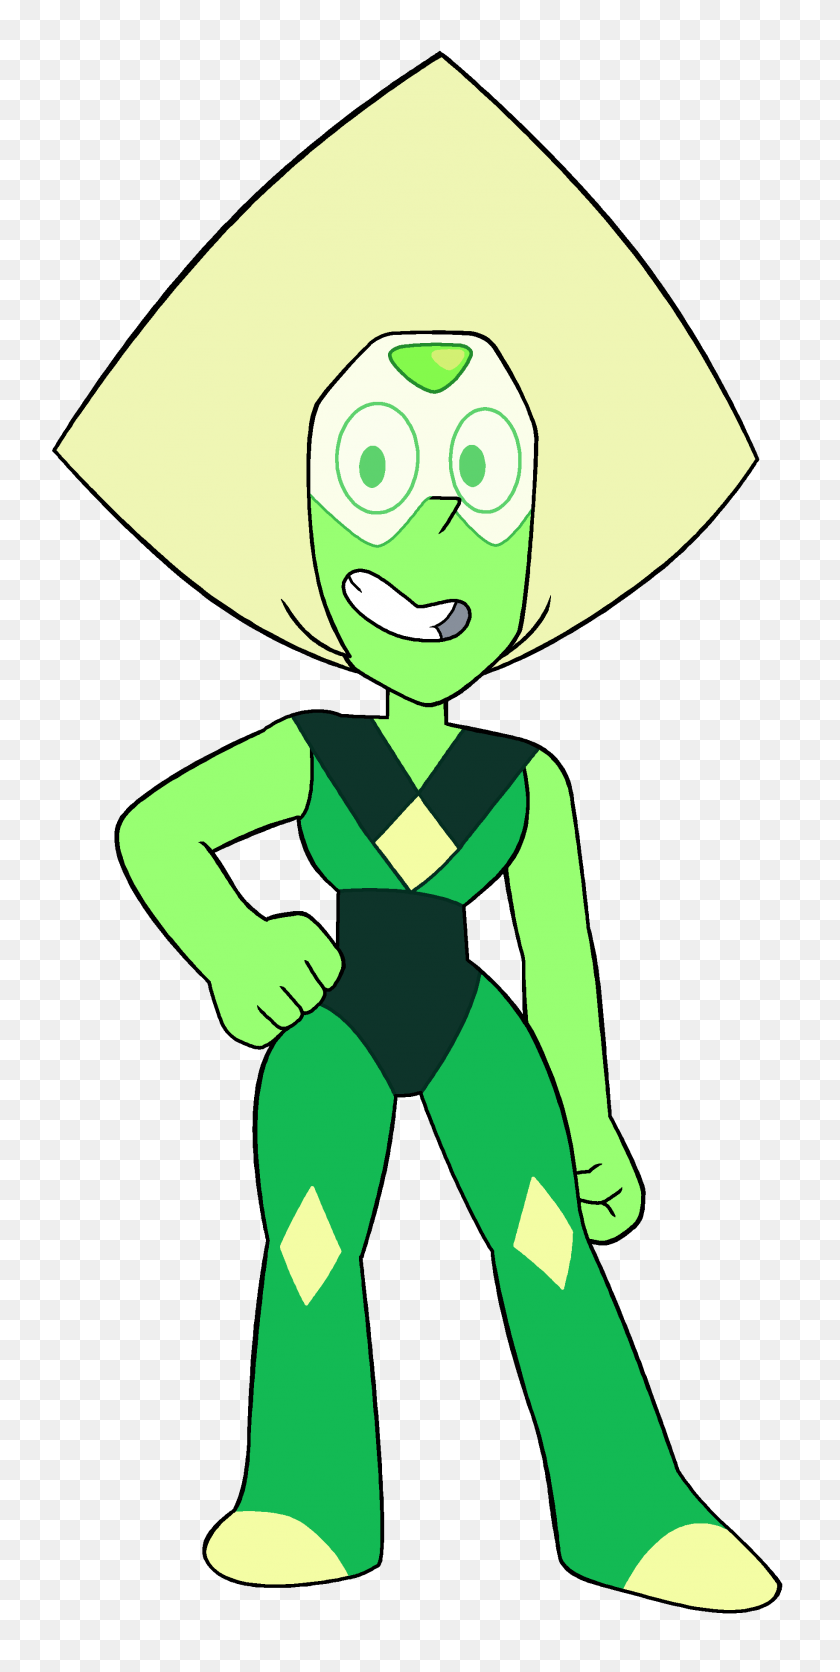 Image - Peridot PNG - FlyClipart